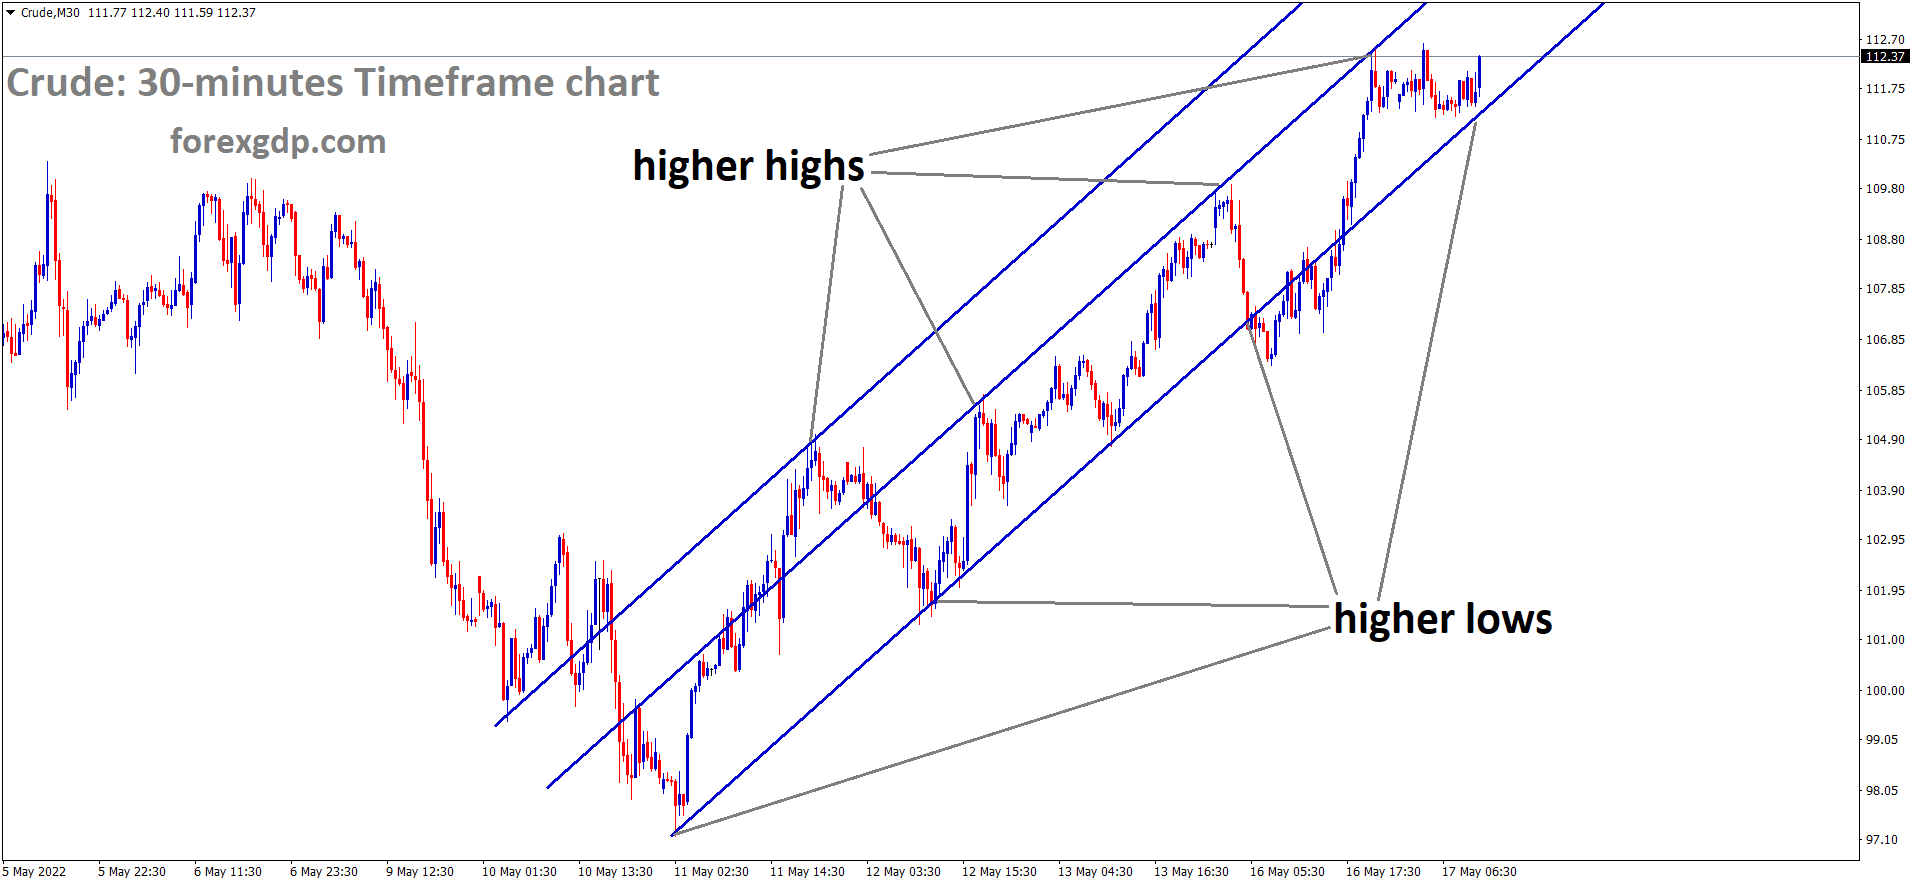 Crude Oil M30 Time Frame Analysis Market is moving in an Ascending channel and the Market has rebounded from the higher low area of the Ascending channel